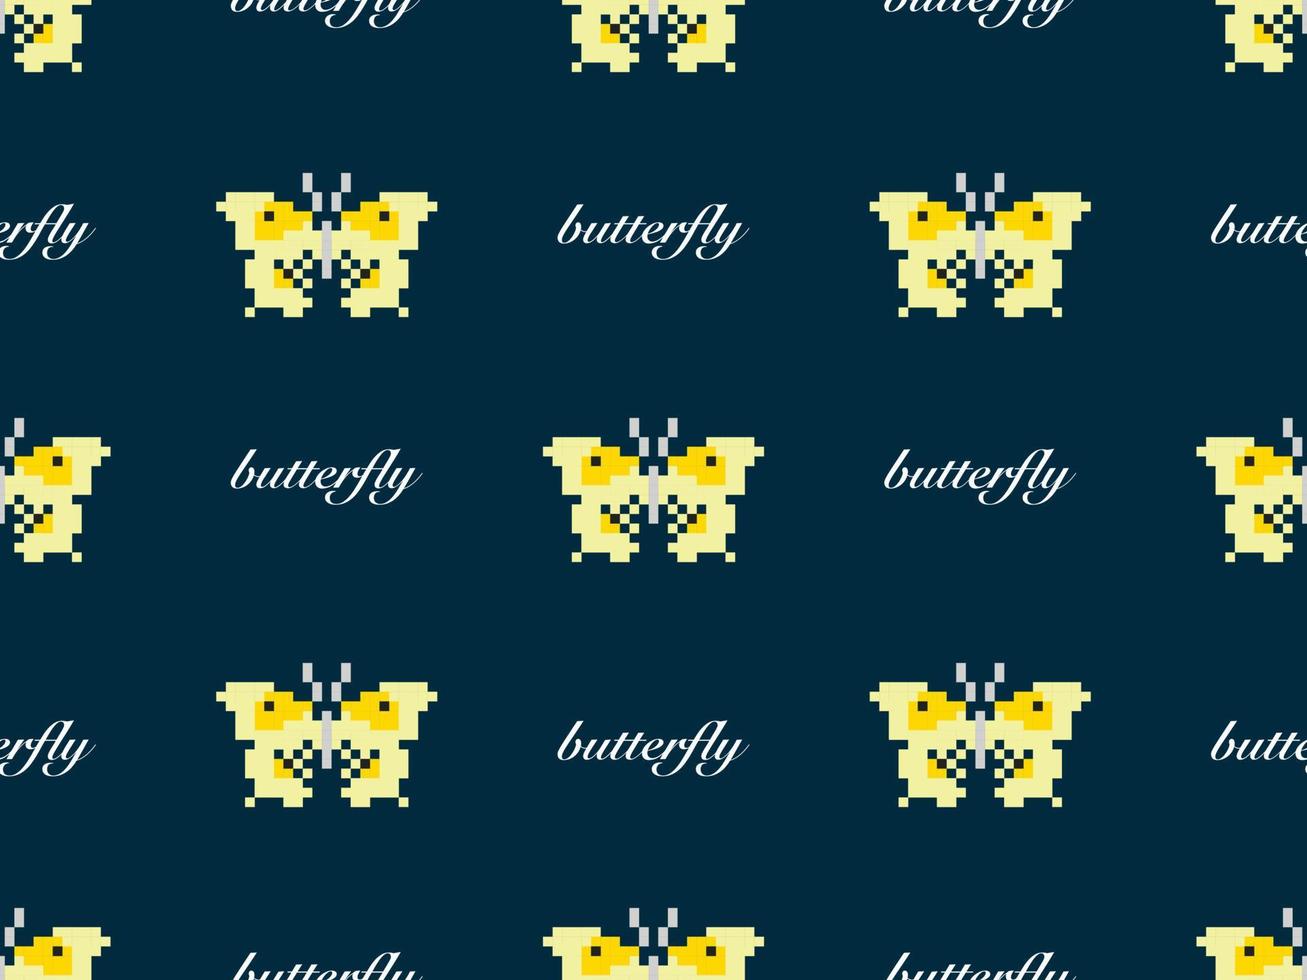 Butterfly cartoon character seamless pattern on blue background. Pixel style vector